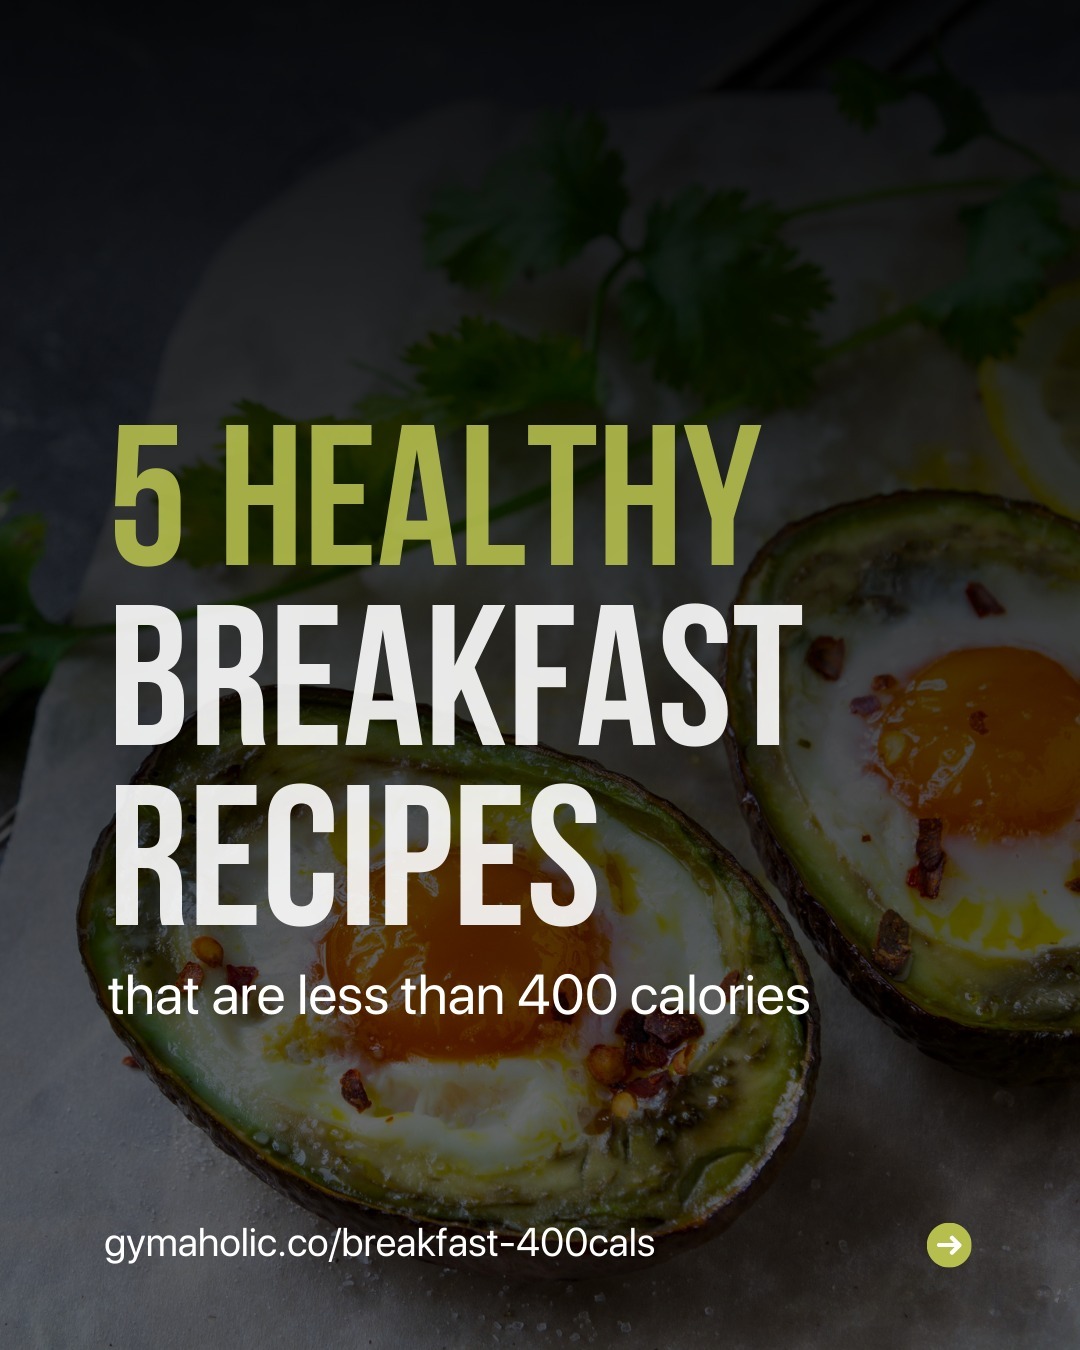 5 Health Breakfast Recipes That Are Less Than 400 Calories